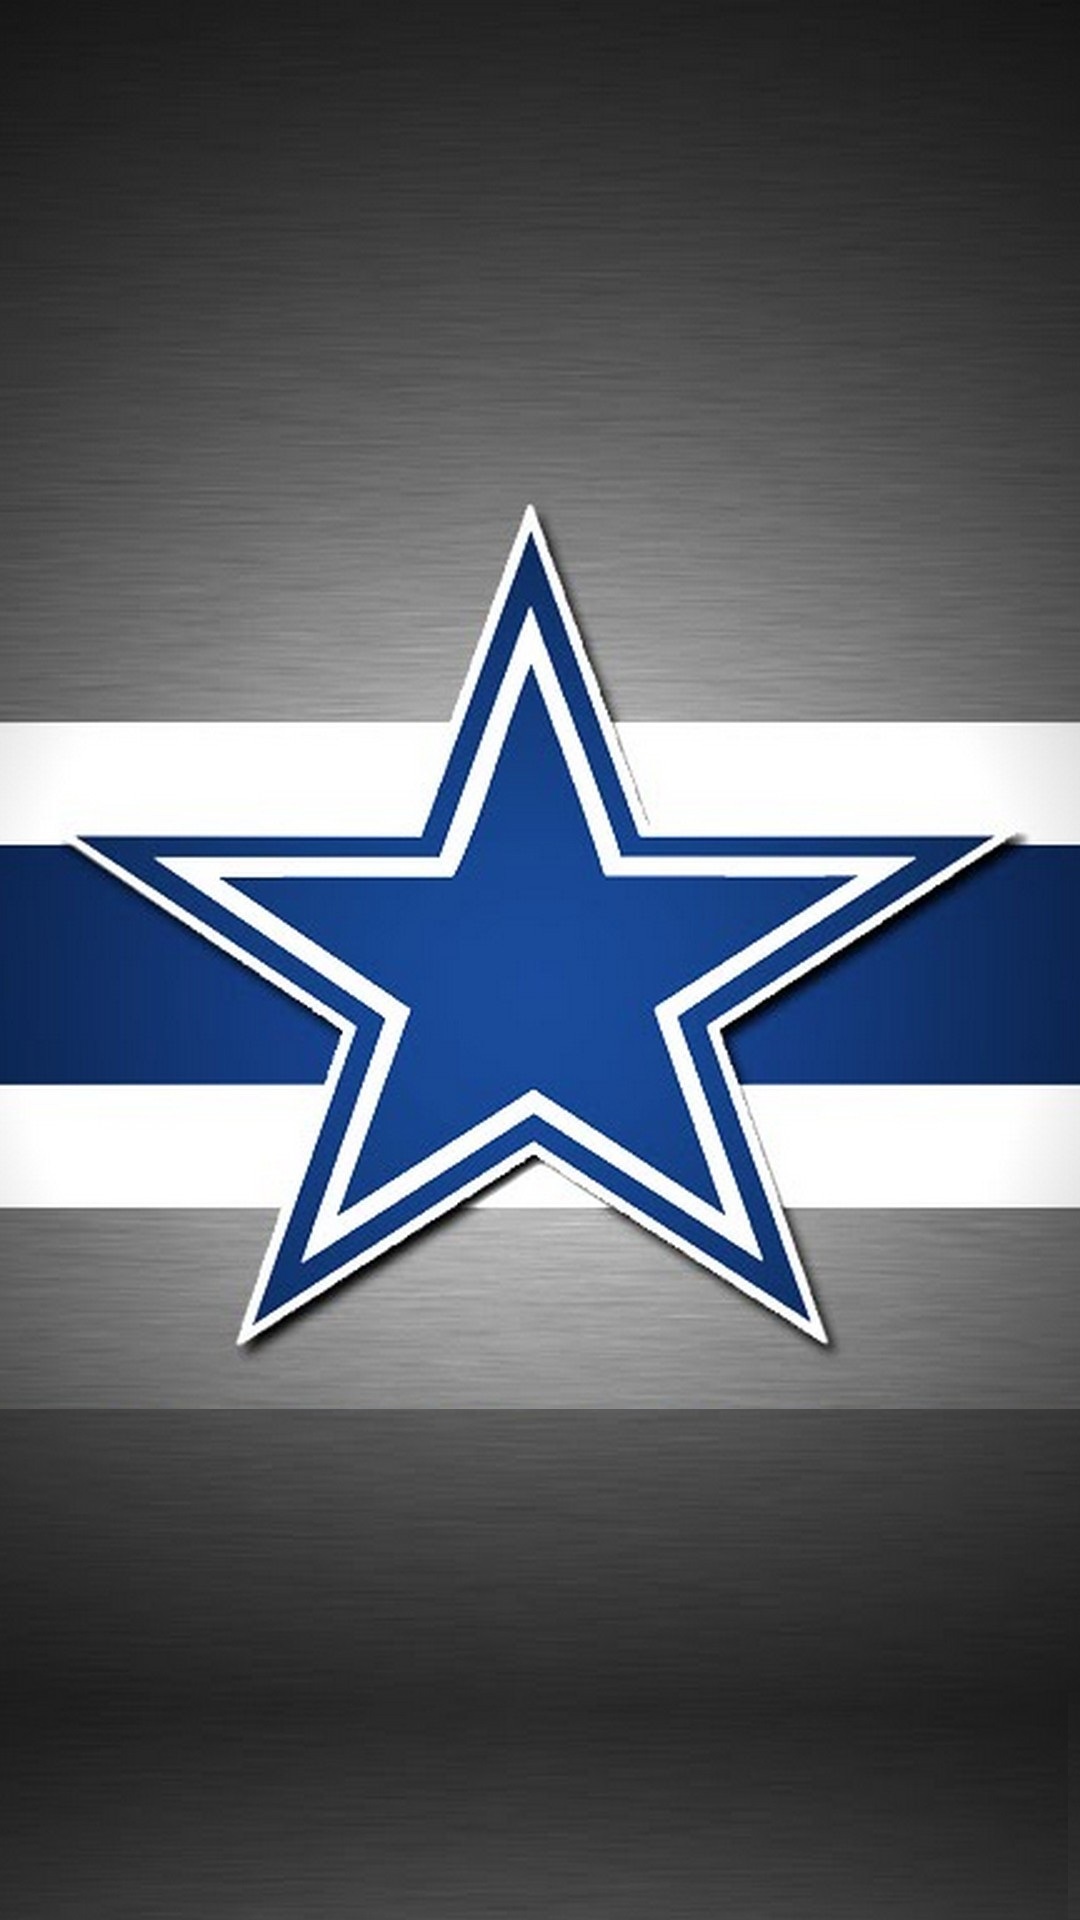 Dallas Cowboys iPhone Lock Screen Wallpaper With high-resolution 1080X1920 pixel. Donwload and set as wallpaper for your iPhone X, iPhone XS home screen backgrounds, XS Max, XR, iPhone8 lock screen wallpaper, iPhone 7, 6, SE, and other mobile devices